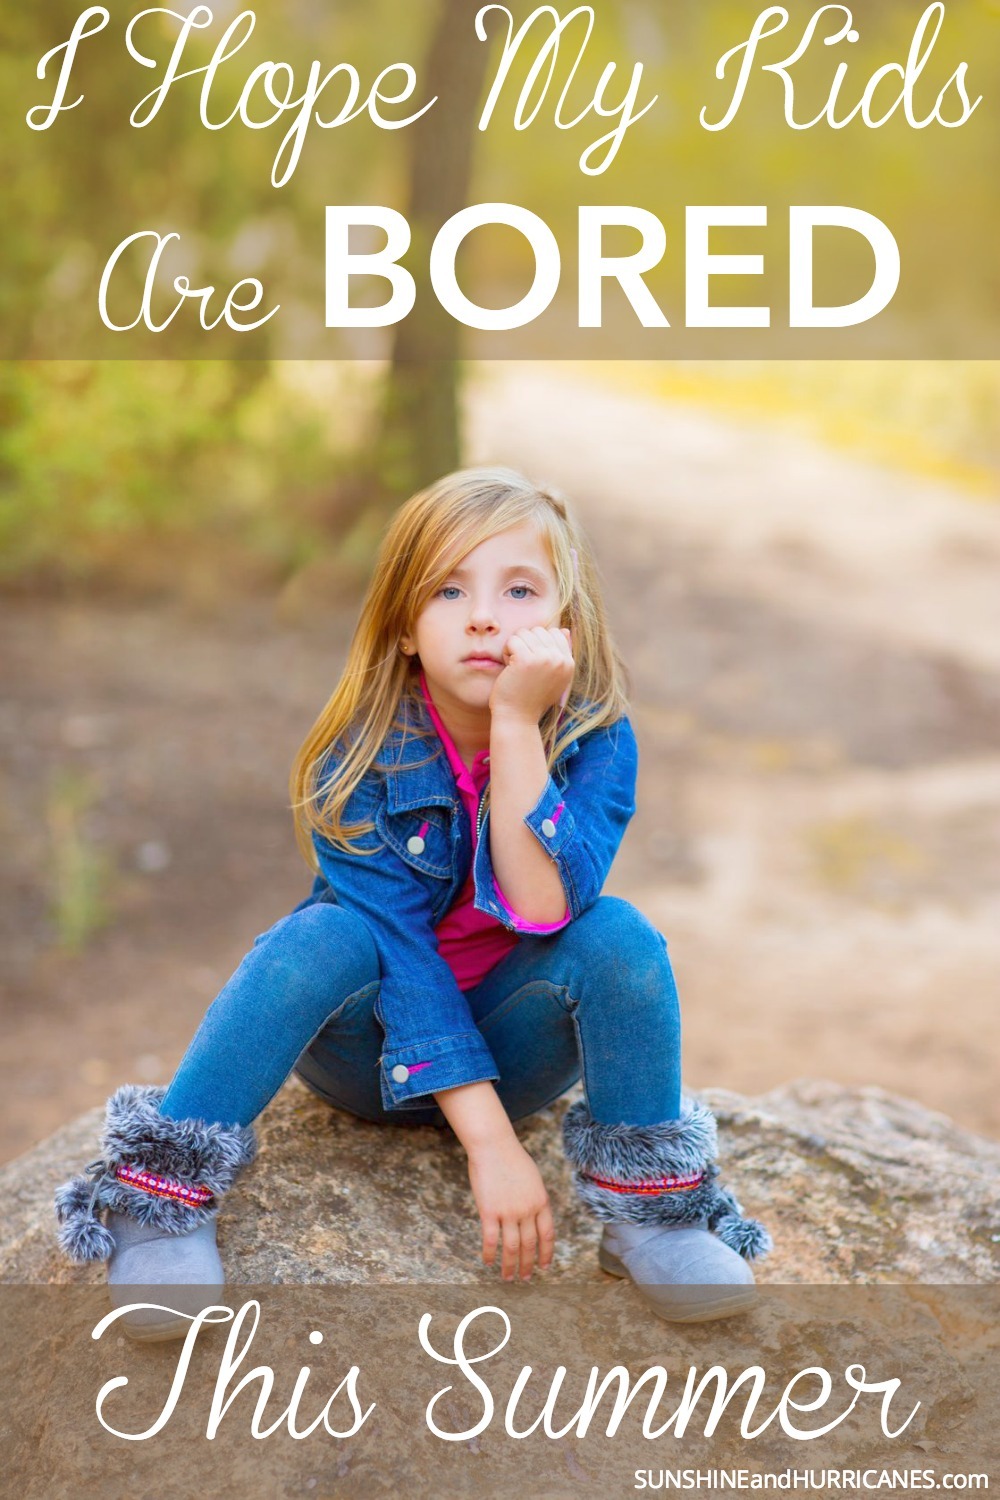 Boredom isn't bad. It isn't a sign that your failing as a parent or that somehow your children are missing out on important enrichment activities. Boredom is a way for kids to tap into their imaginations and creativity and learn to entertain themselves. It's worked for generations of kids before this one and we had some pretty fun summers filled with made-up adventures, getting dirty and chasing fireflies at night. That's why I HOPE MY KIDS ARE BORED THIS SUMMER>